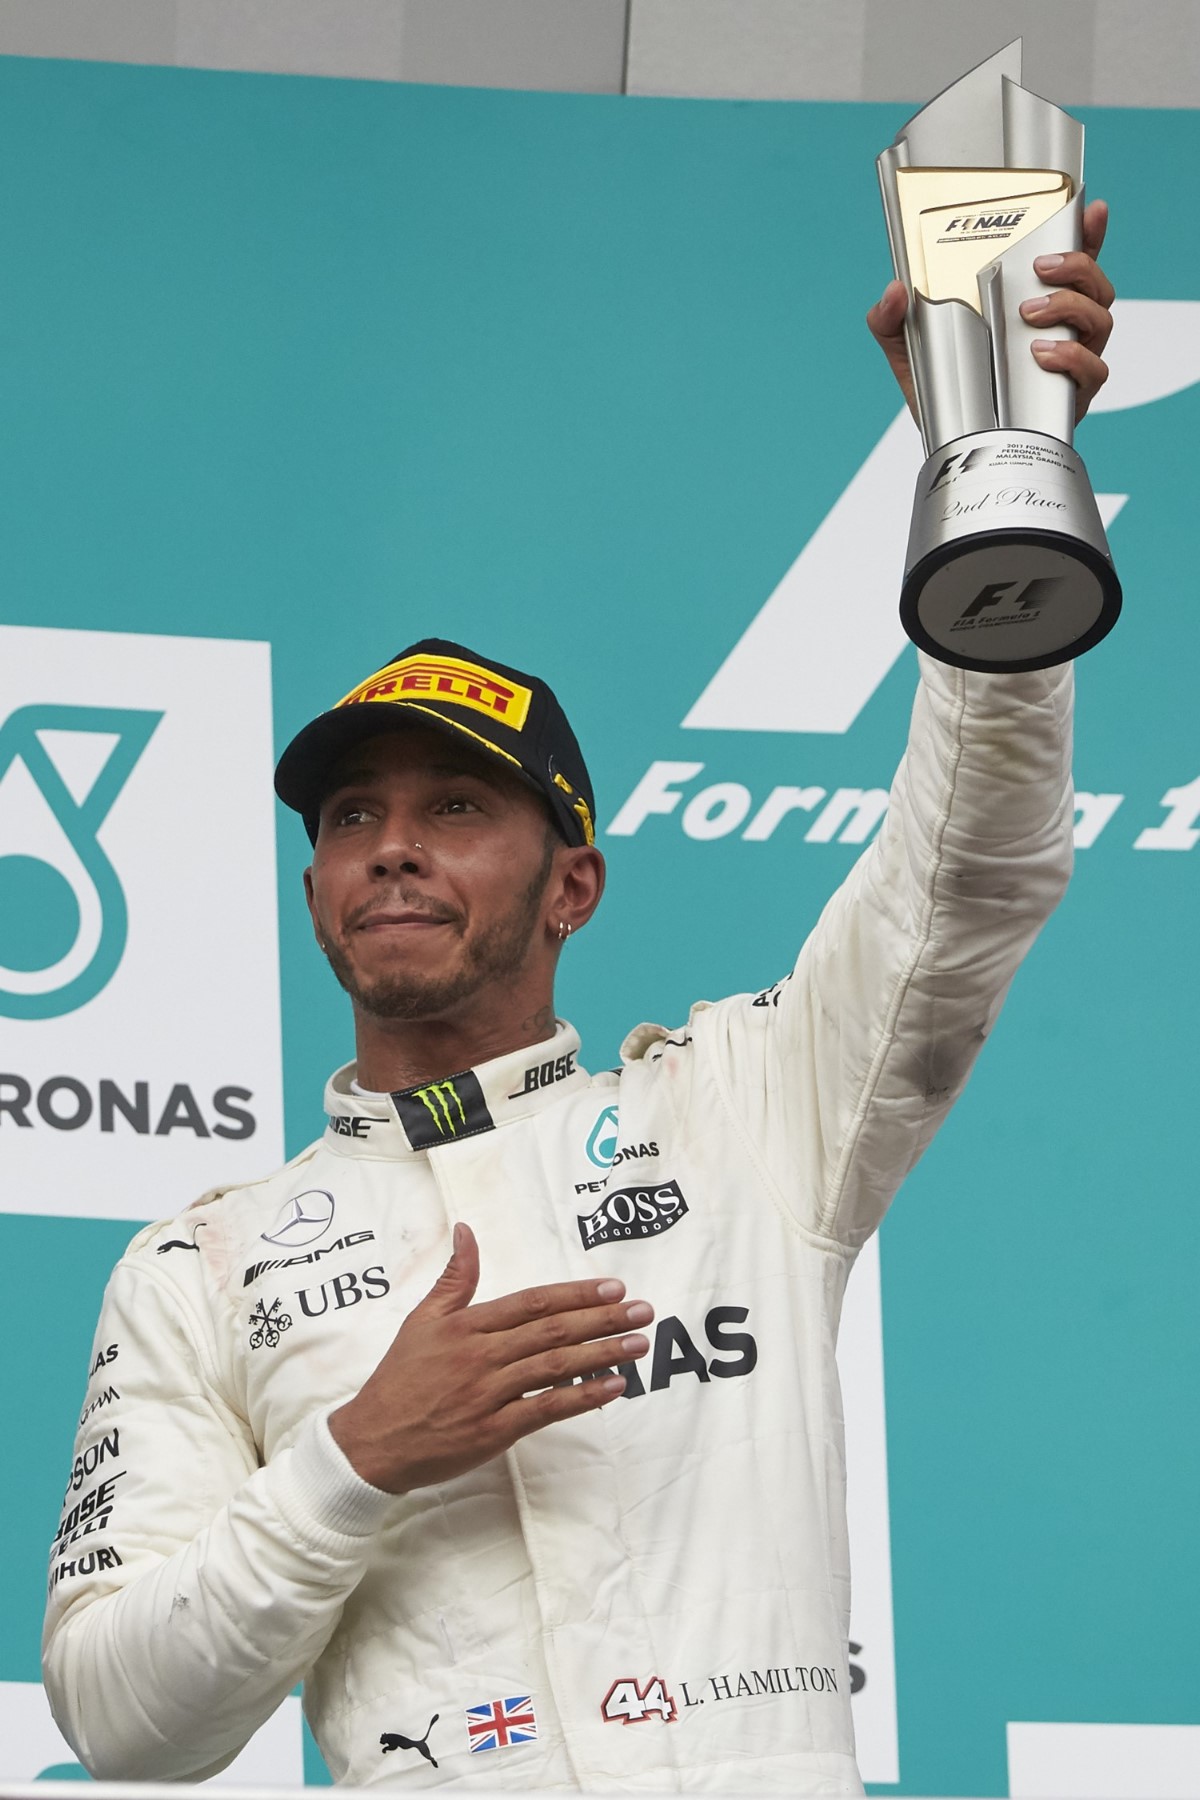 Well of course Hamilton is the 2017 champion. AR1.com has been saying that since August